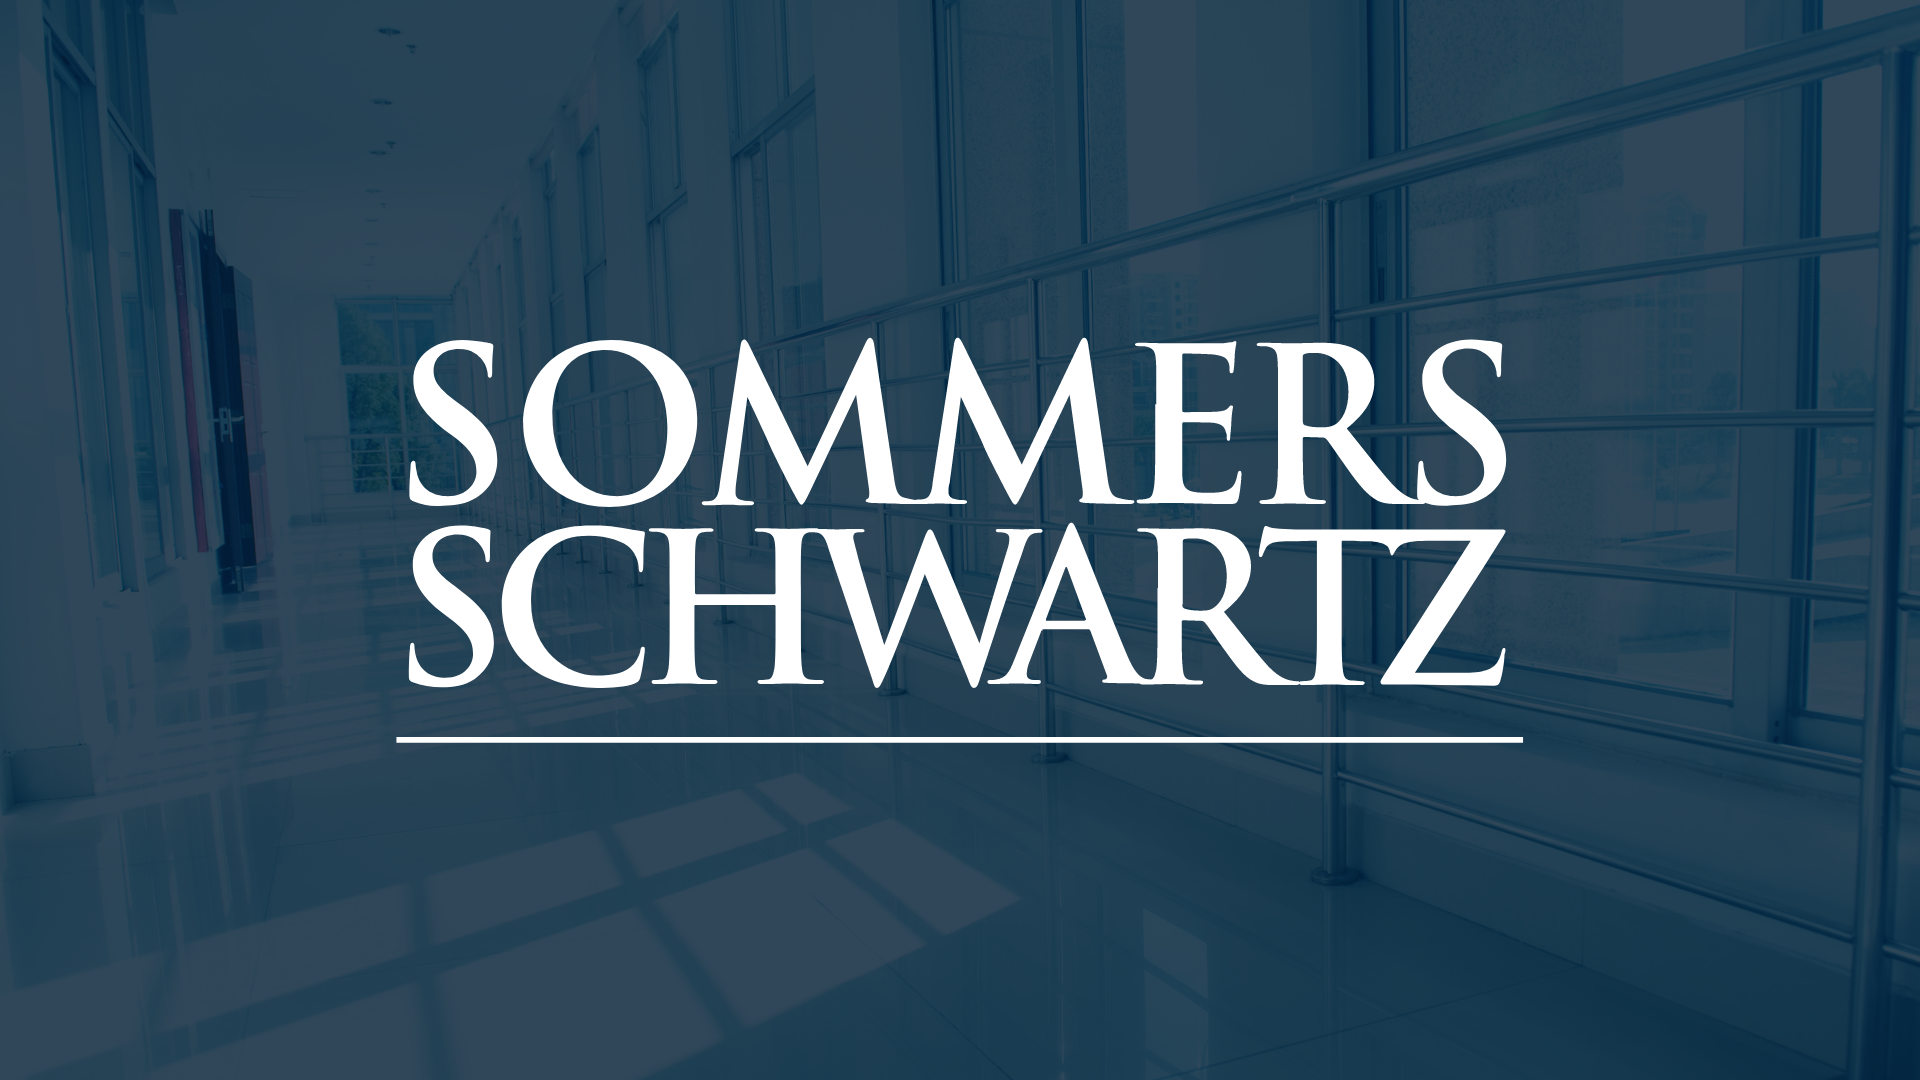 Sommers Schwartz Files Hospital Negligence Lawsuit Against Henry Ford Jackson Hospital for Discharging a Vulnerable Patient into Freezing Weather Conditions, Causing Her Death - Law Firm Newswire